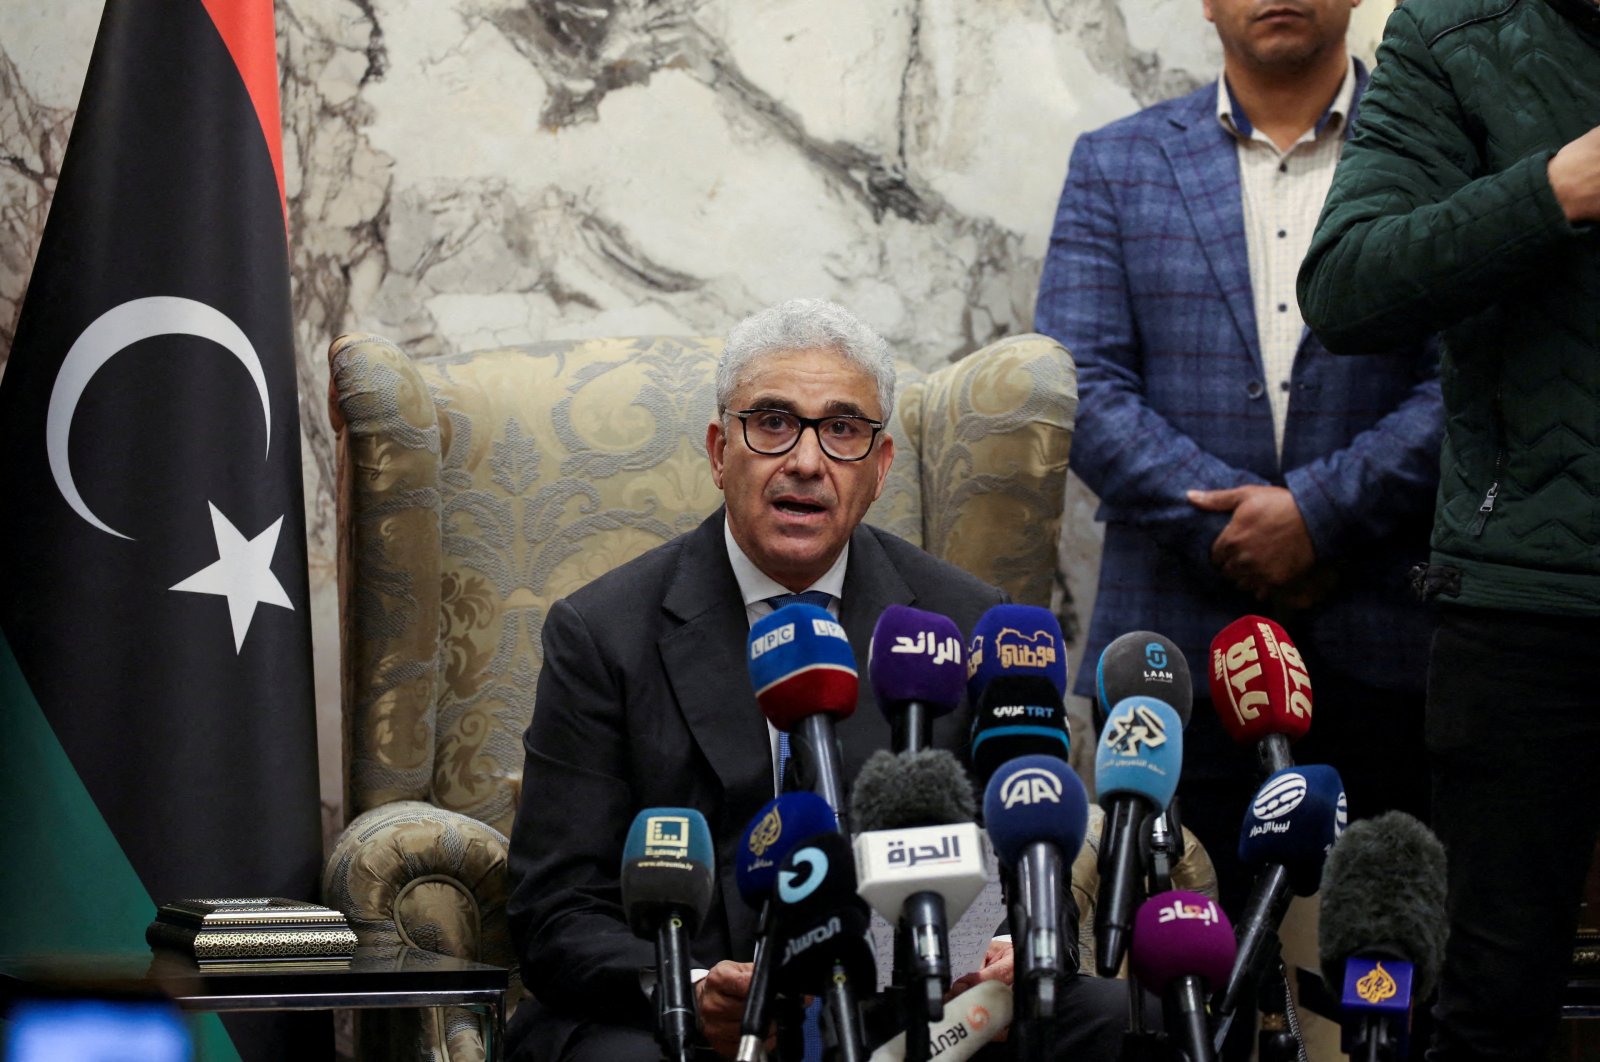 Fathi Bashagha, designated as prime minister by the parliament, delivers a speech at Mitiga International Airport, in Tripoli, Libya, Feb. 10, 2022. (Reuters File Photo)